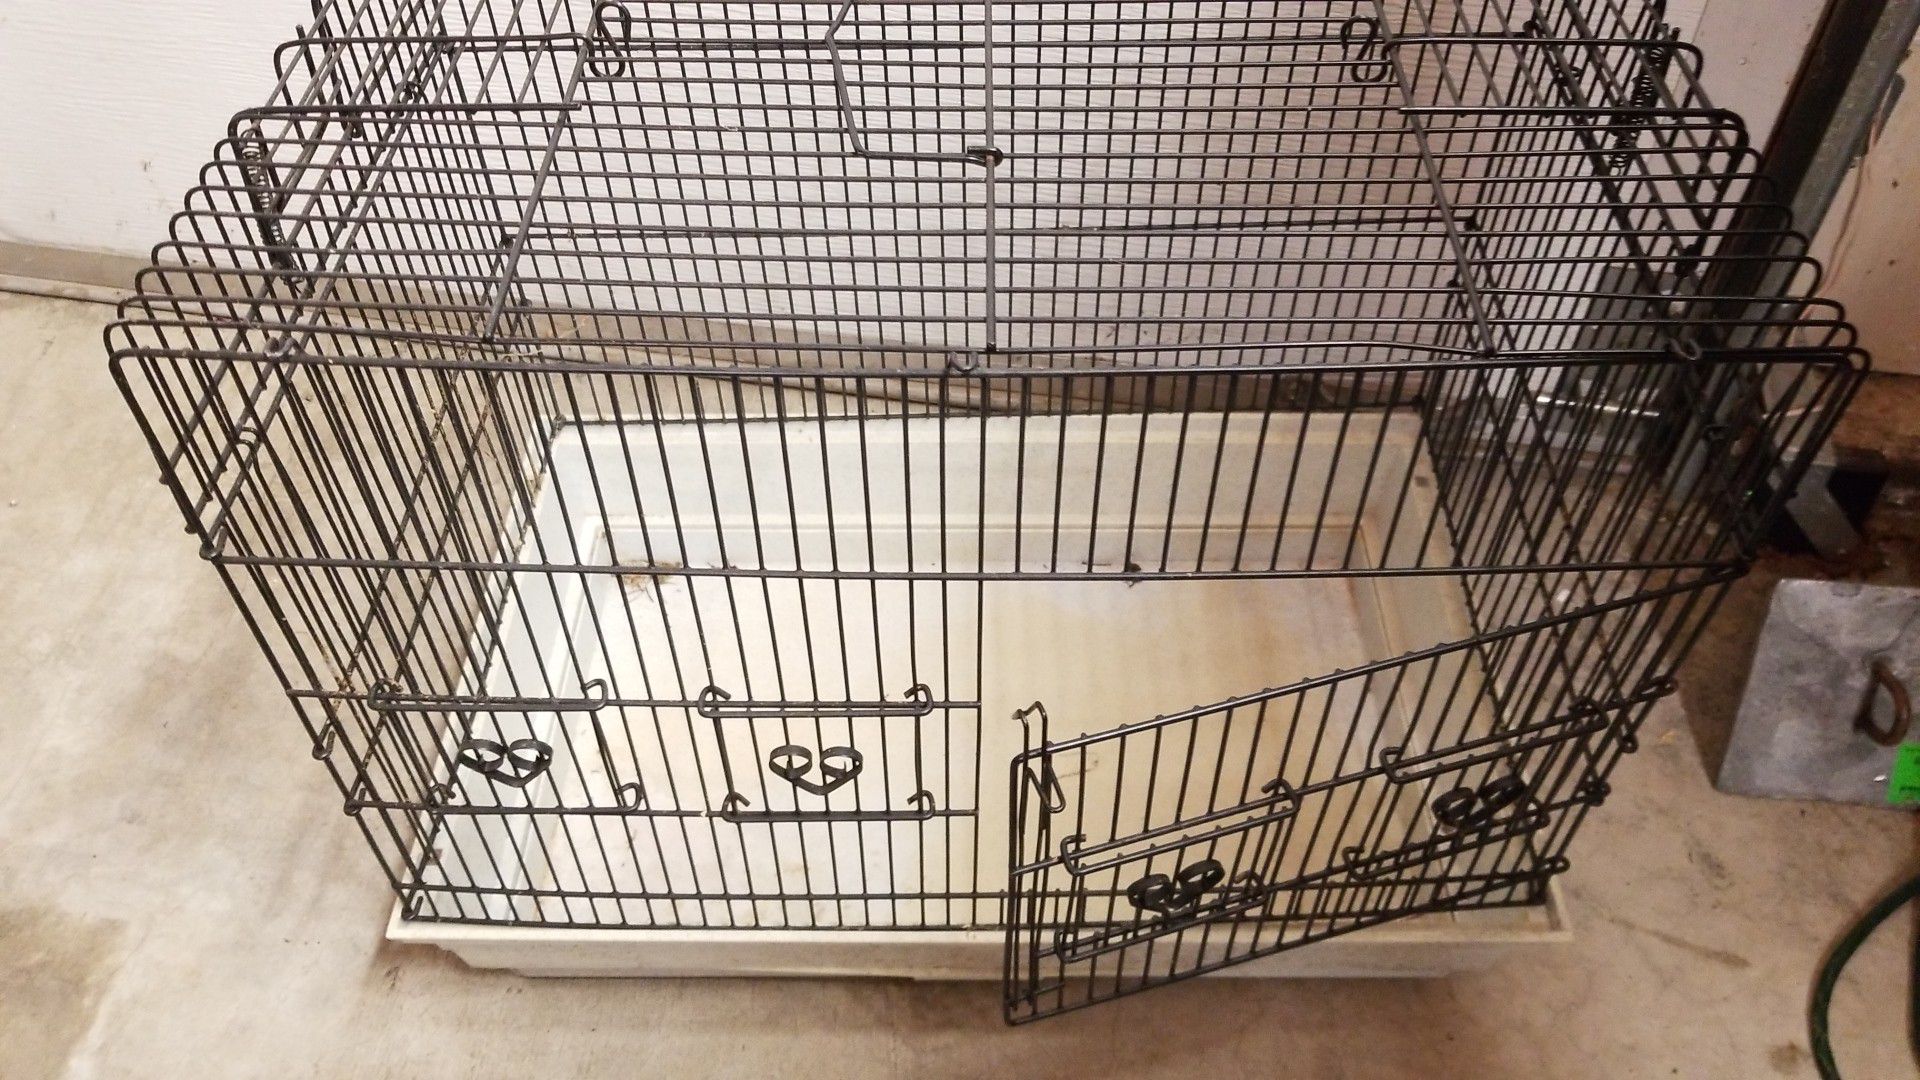 Bird or critter cage 23x19.5x14 with cleaning tray, 5 doors on is quite large in the front